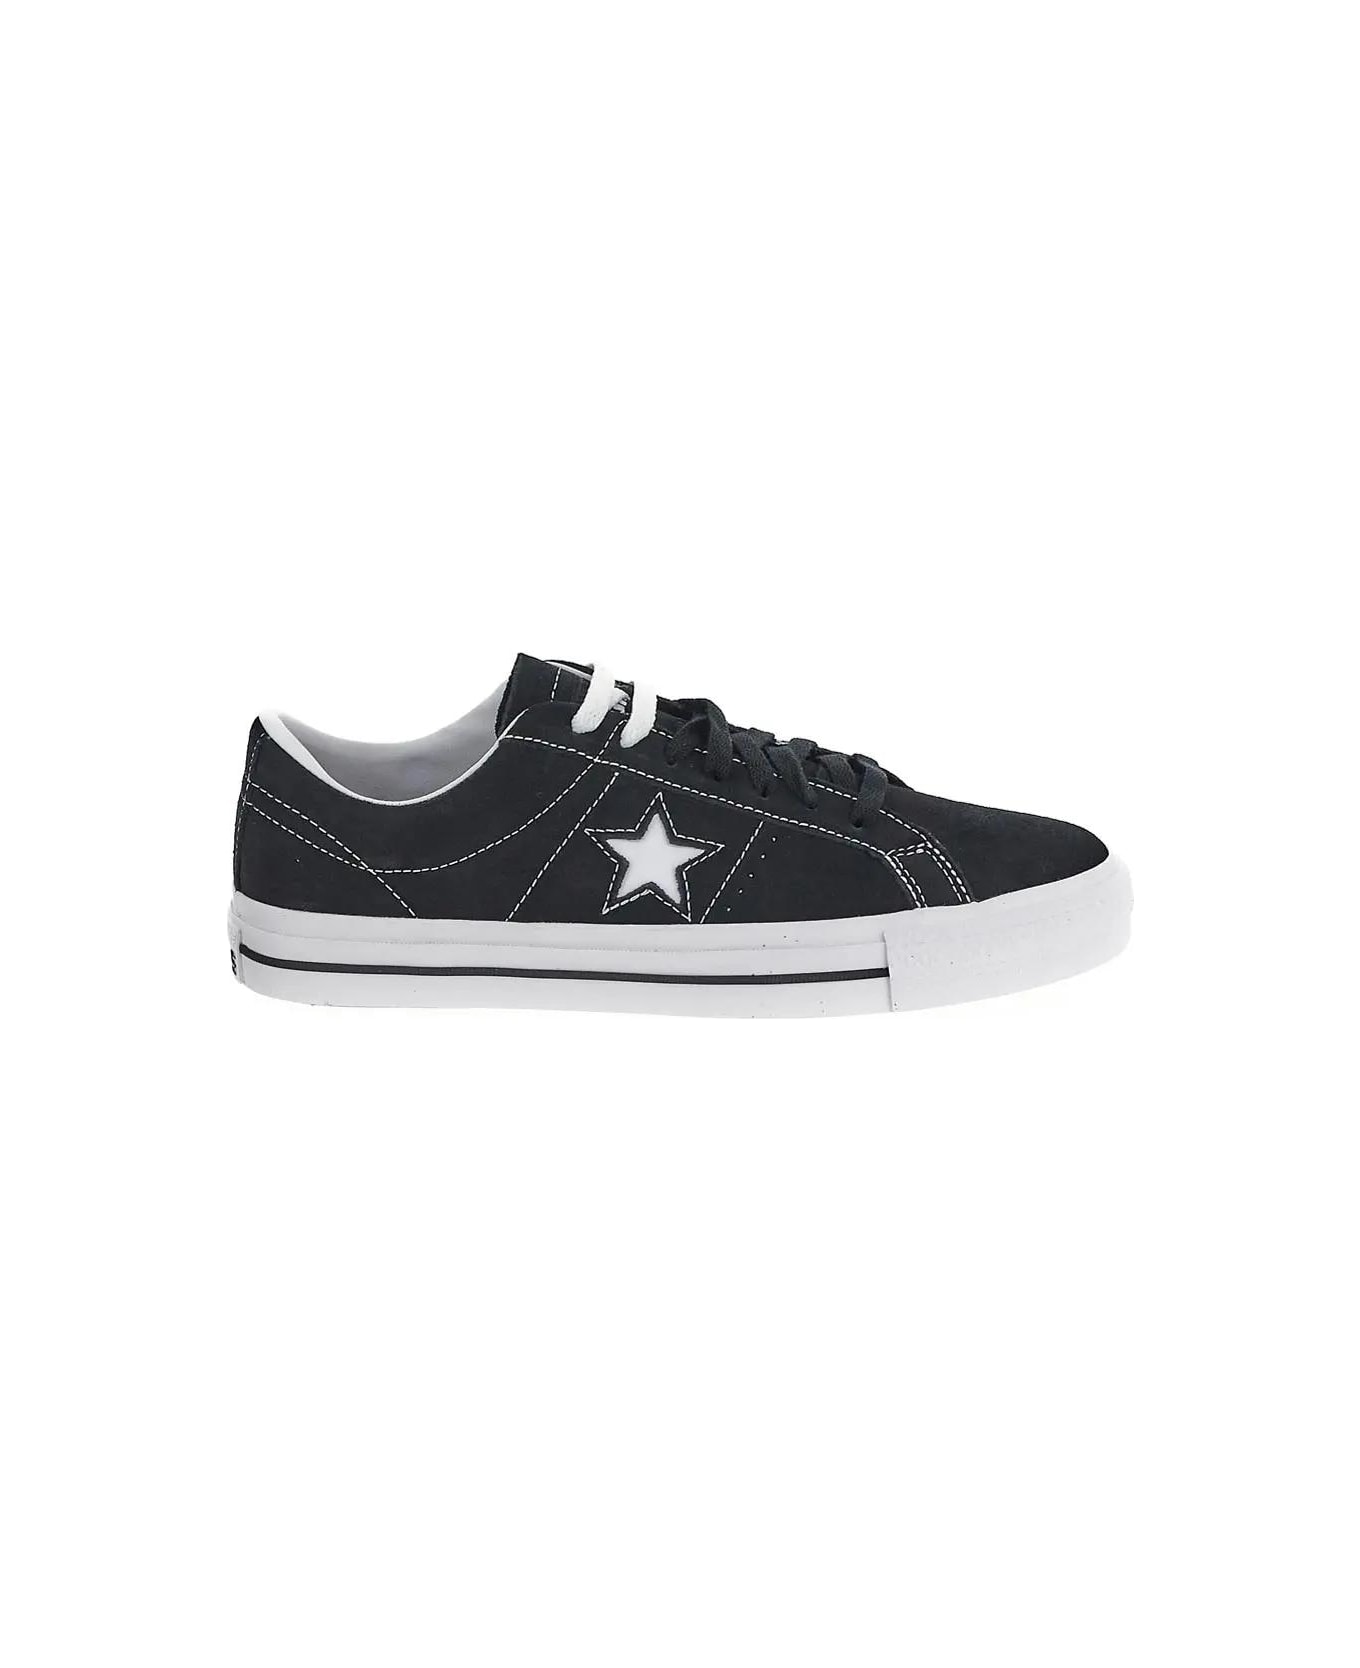 Converse One Star Pro Sneakers - Black